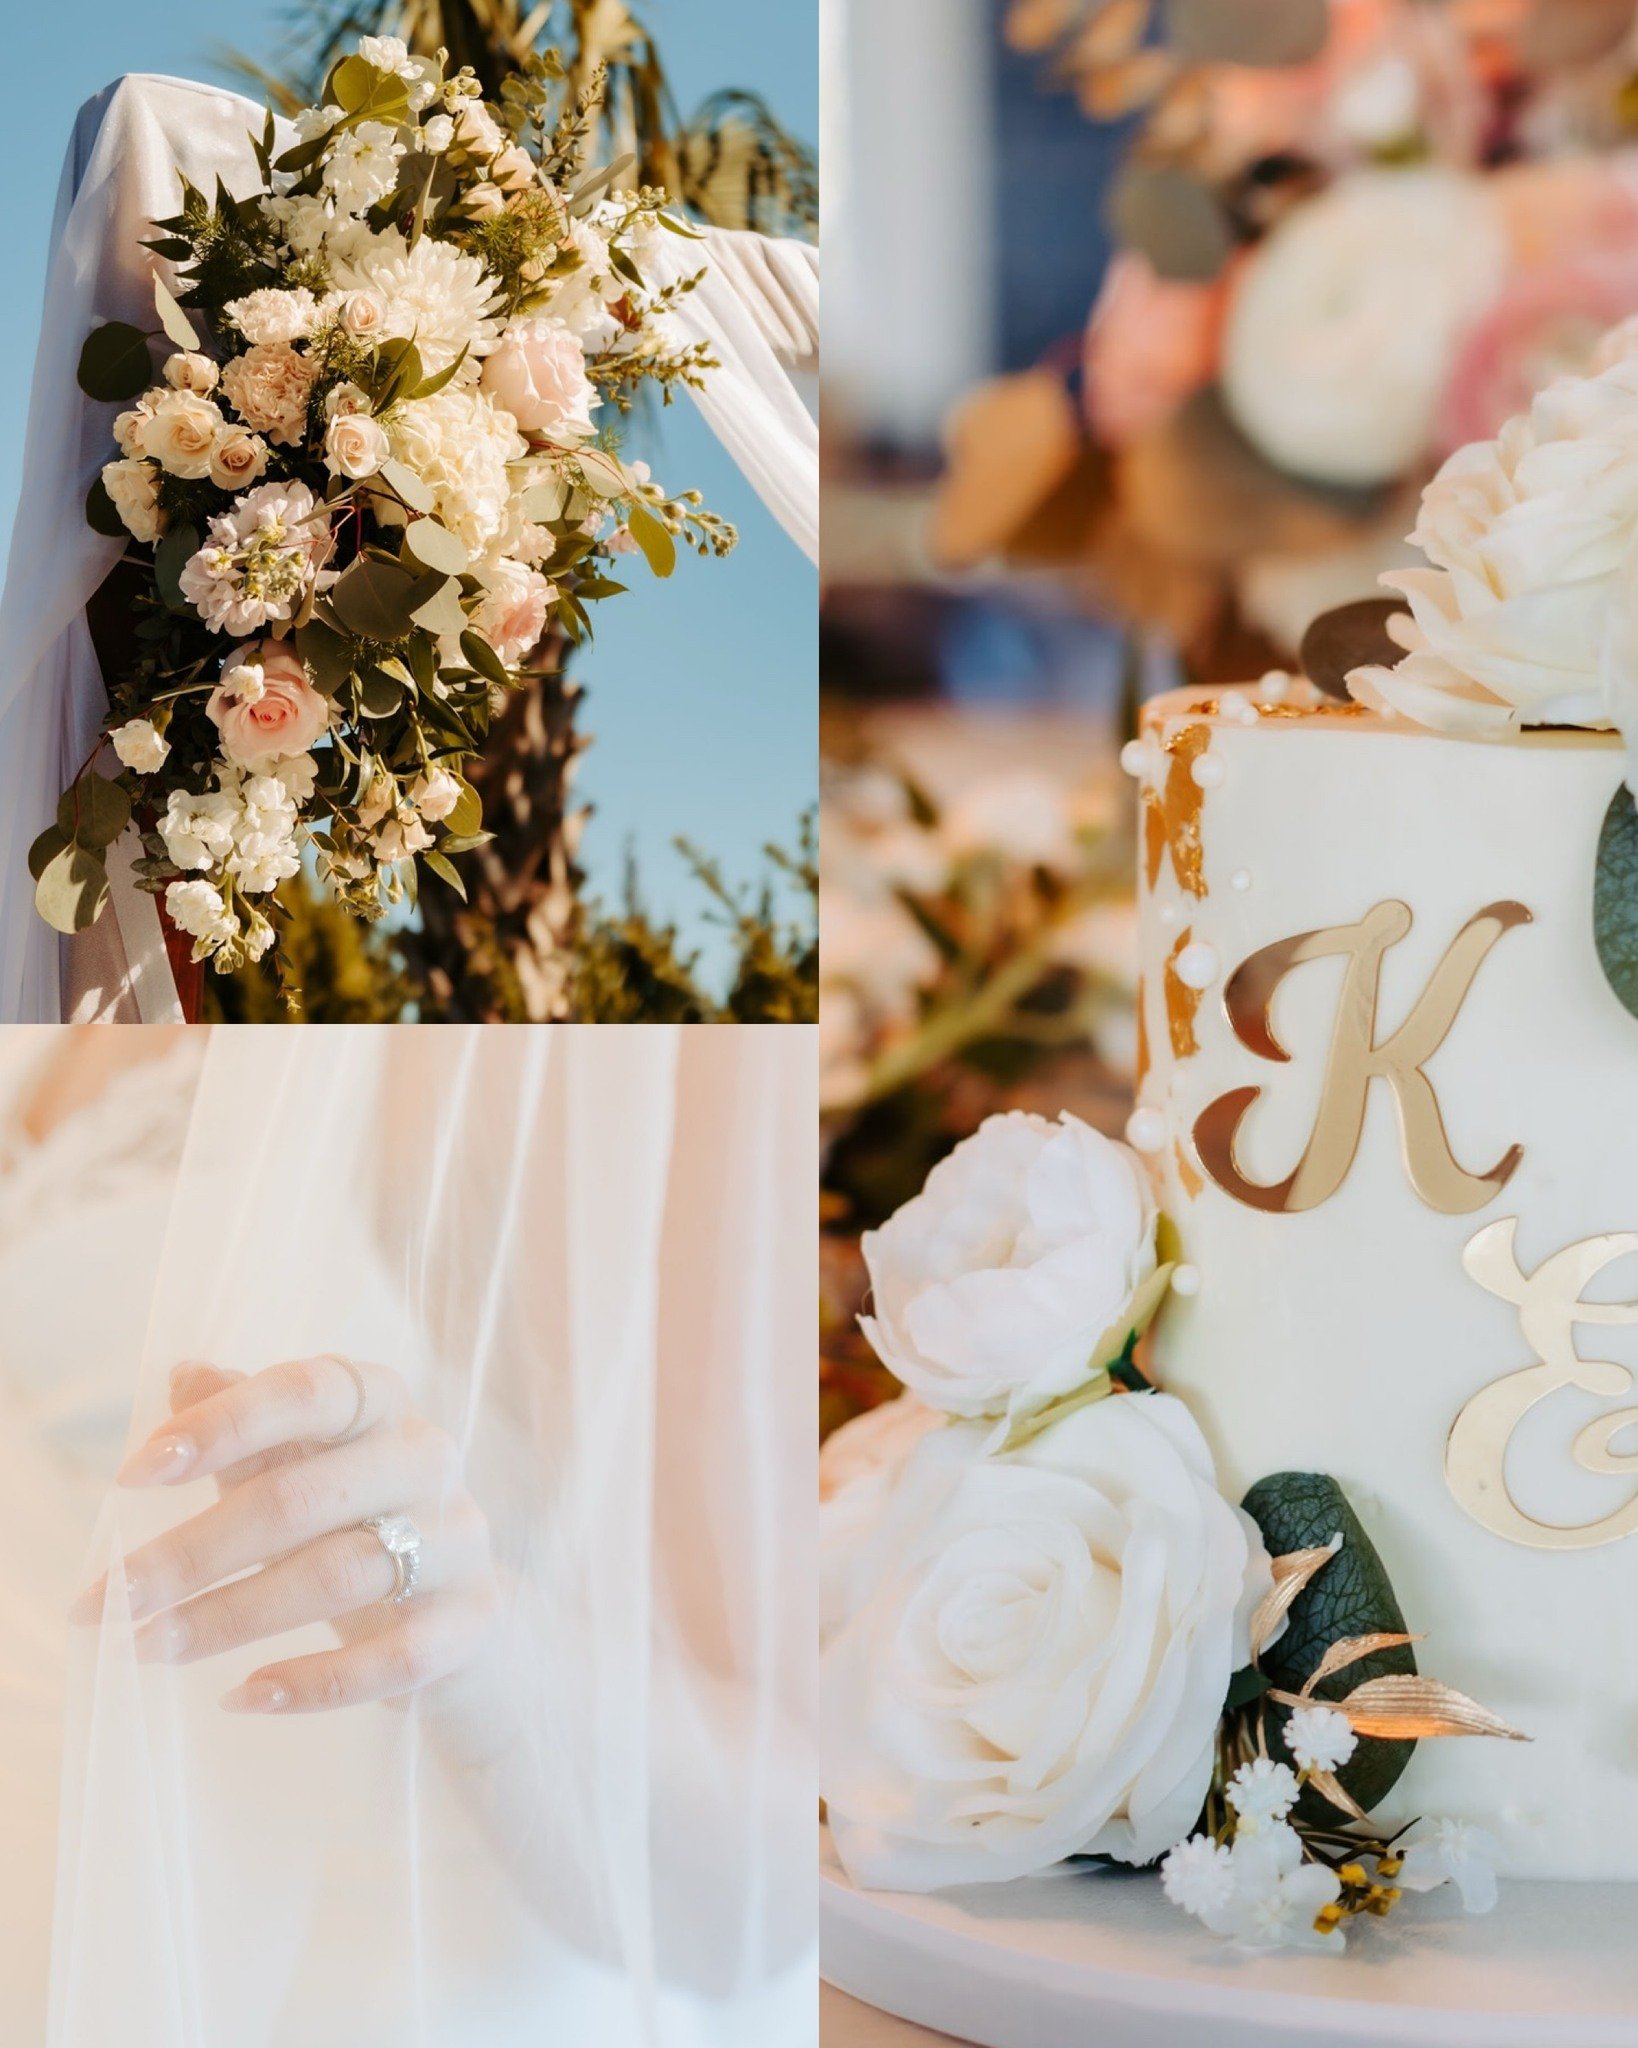 From the delicate lace of a veil to the sparkle of precious rings, each element tells a story of romance and commitment. You will never regret having your photographer capture these small details of your big day!

#magicthroughmylens #creativelifehap